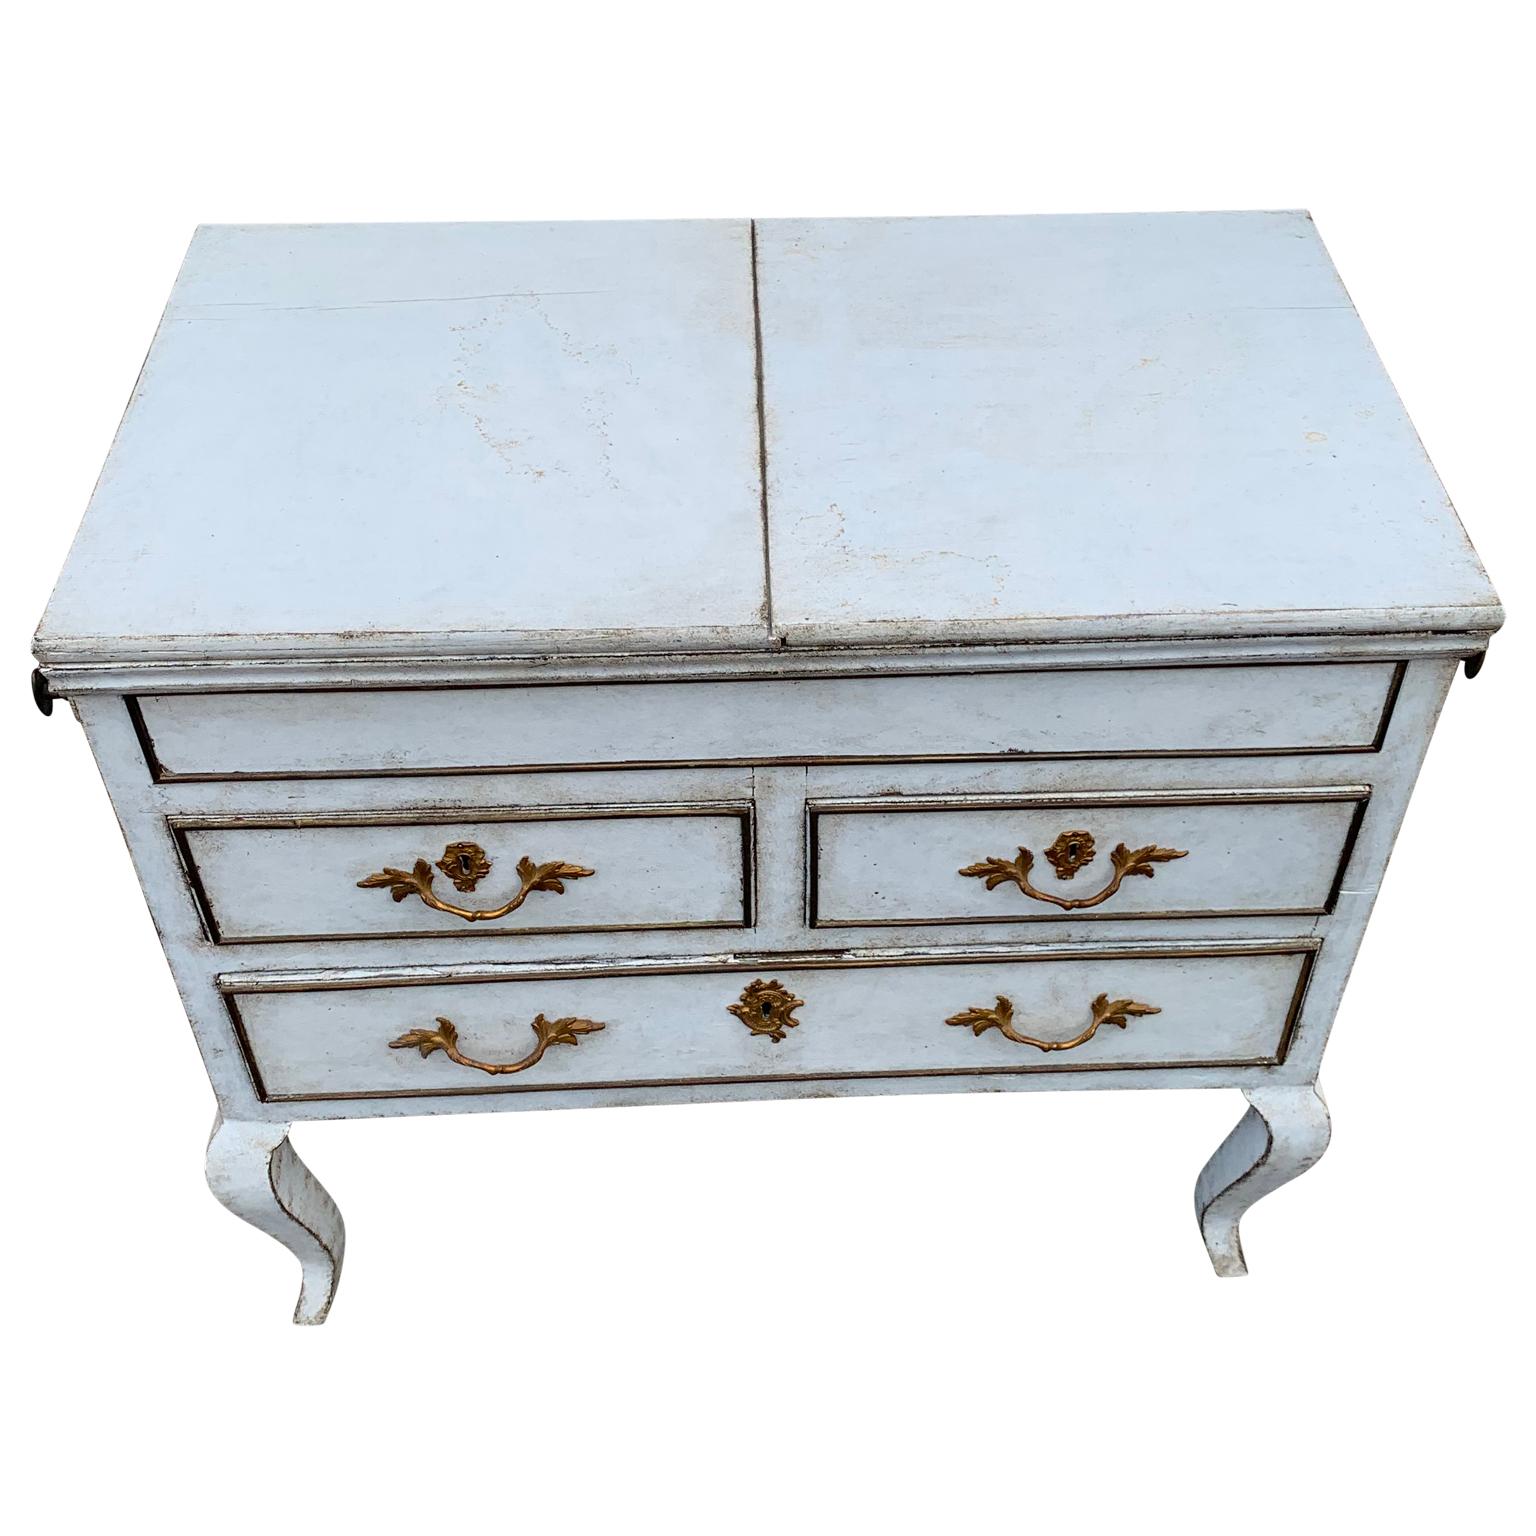 Swedish 19th century vanity dresser with three drawers

The drawers are lined with brass lists and Louis Seize style bronze hardware.

EUR 175 delivery to most areas of London UK, The Netherlands, Belgium, Denmark, Sweden and Northern Germany.

 